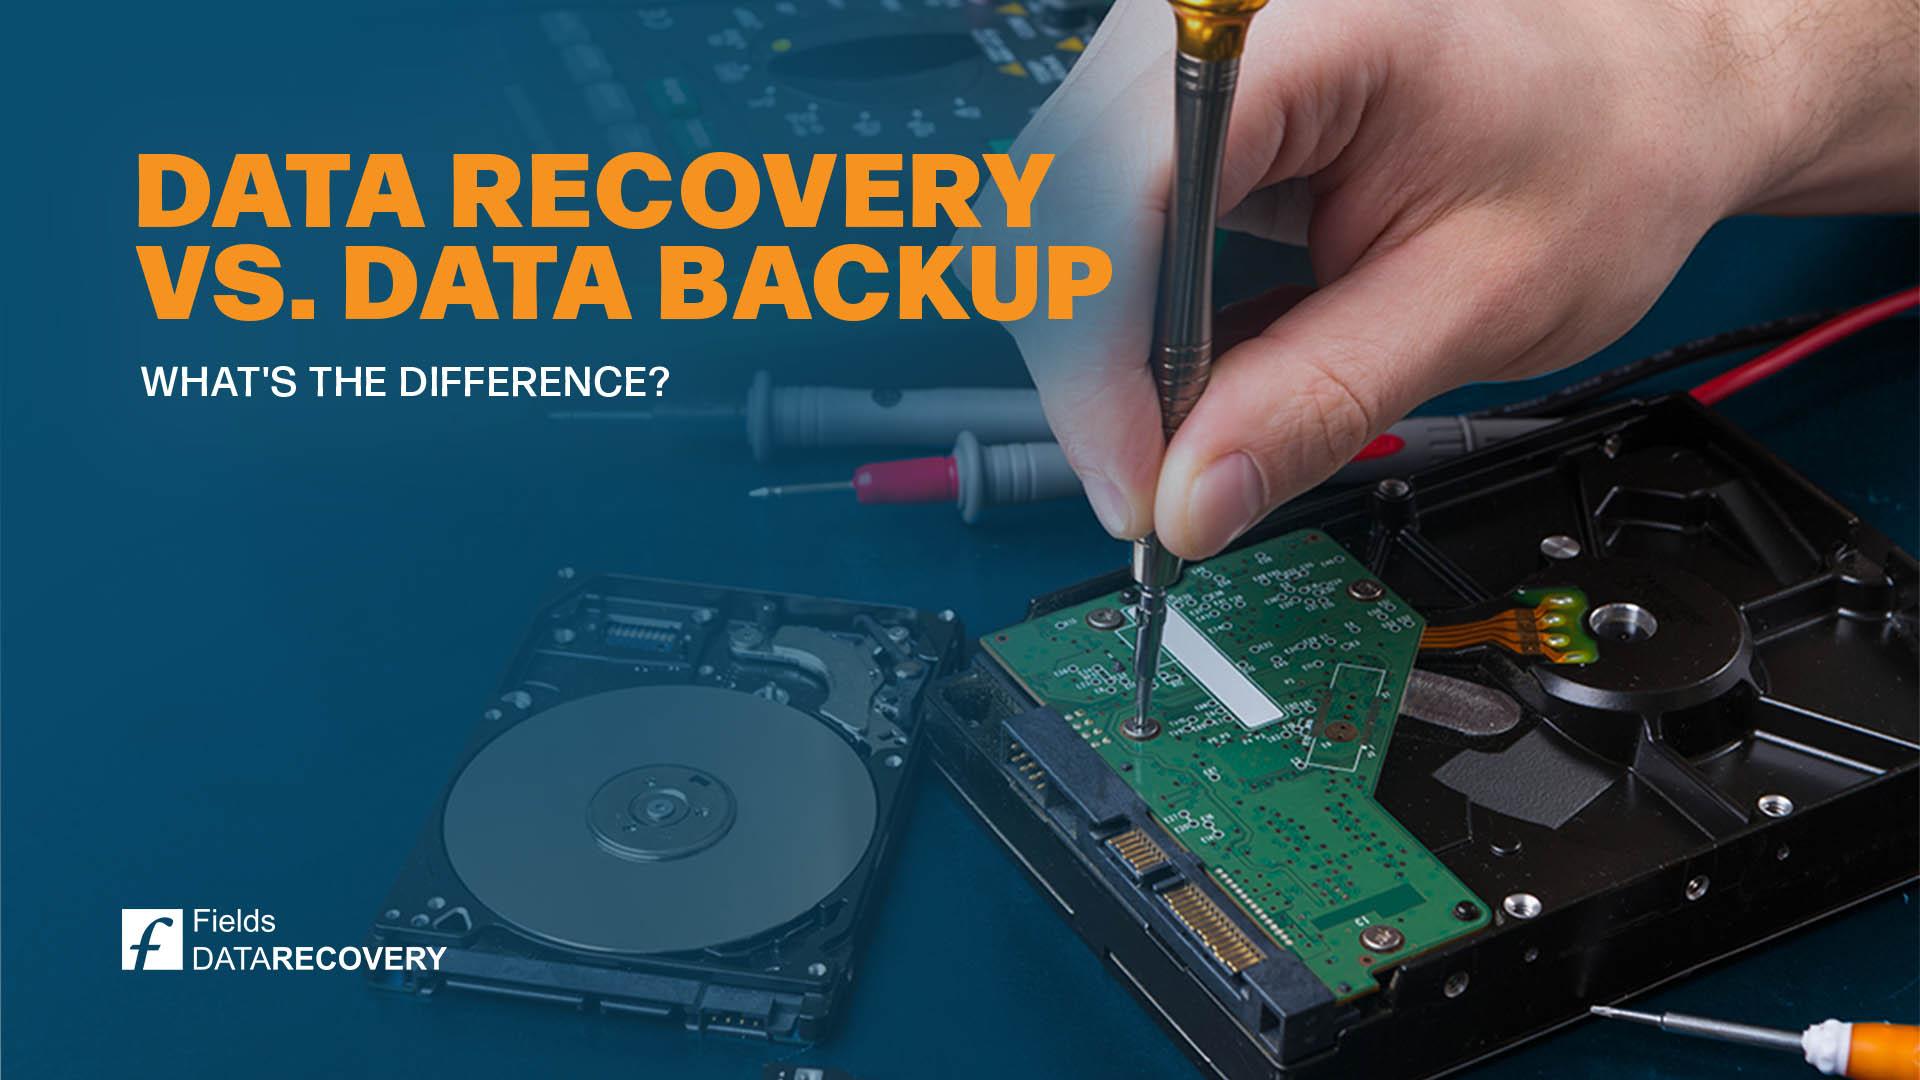 Data Recovery vs. Data Backup: What's the Difference?